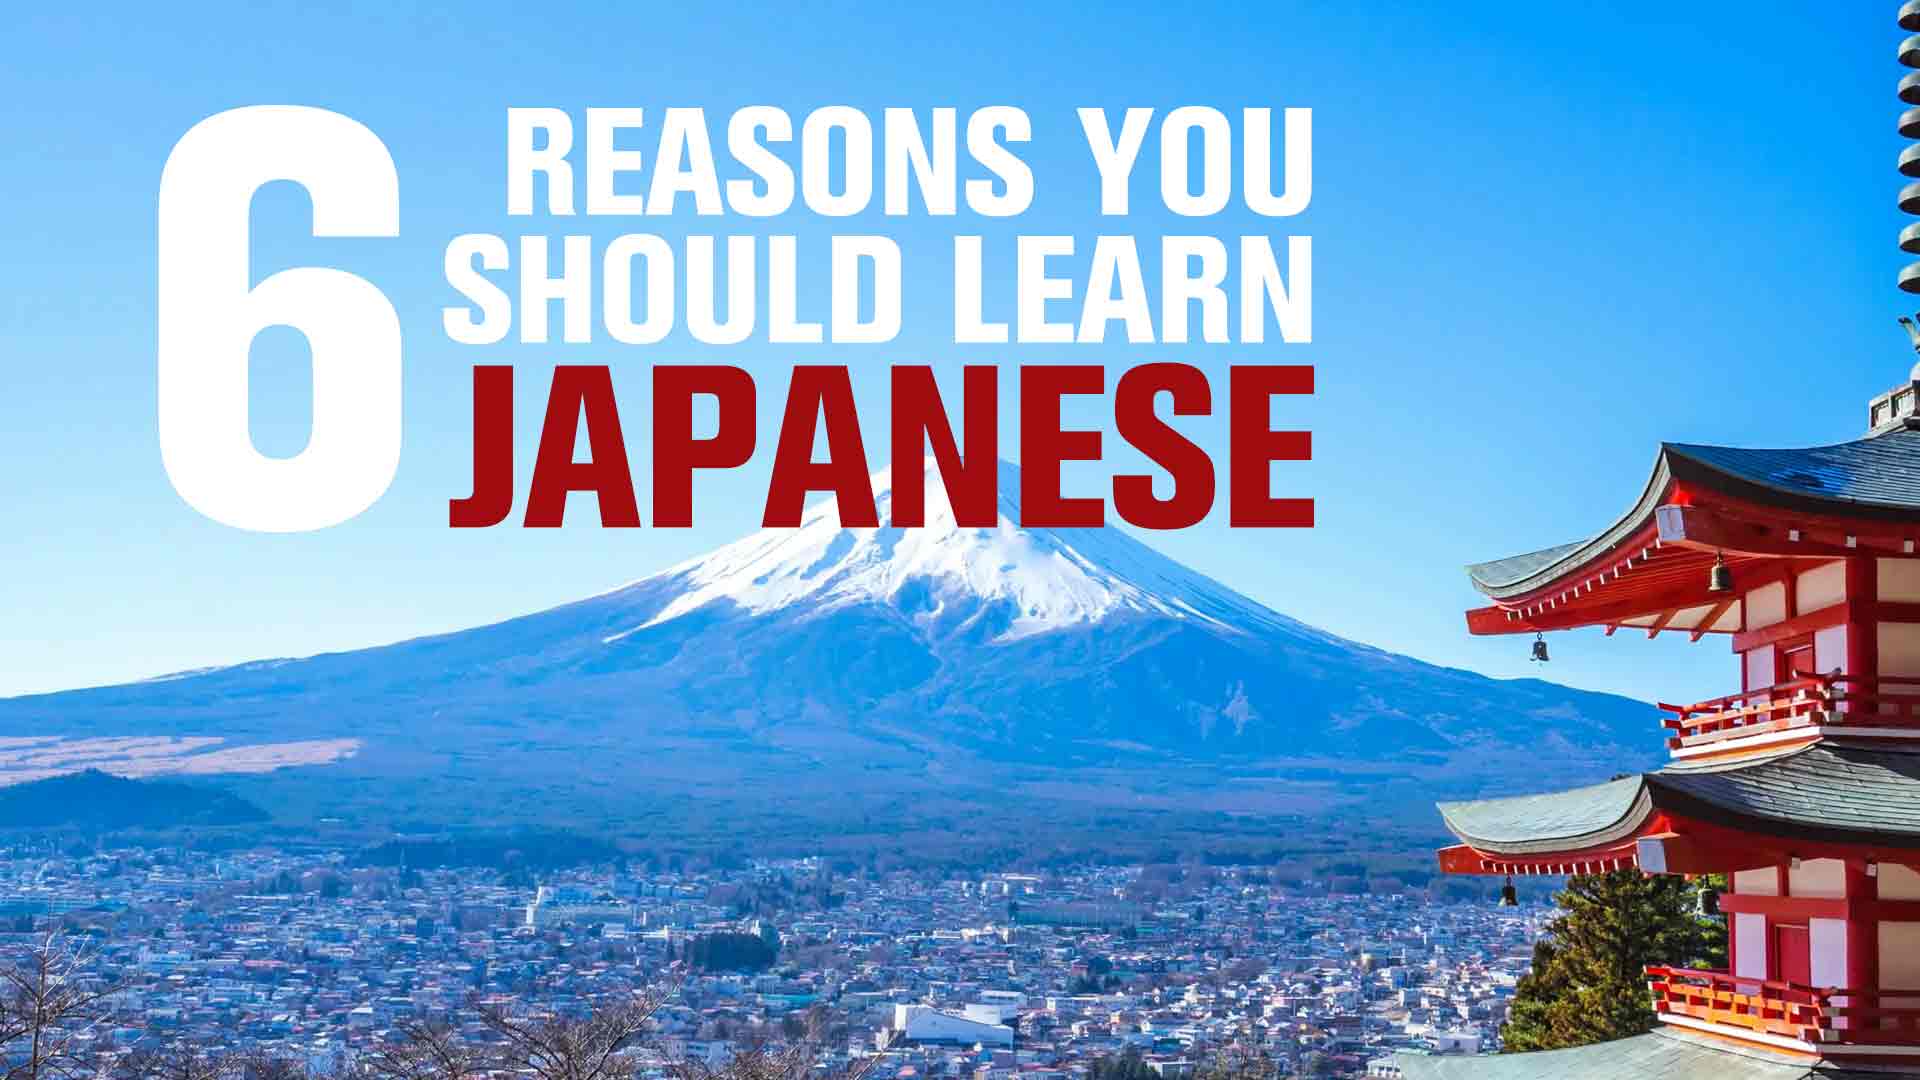 6 REASONS YOU SHOULD LEARN JAPANESE